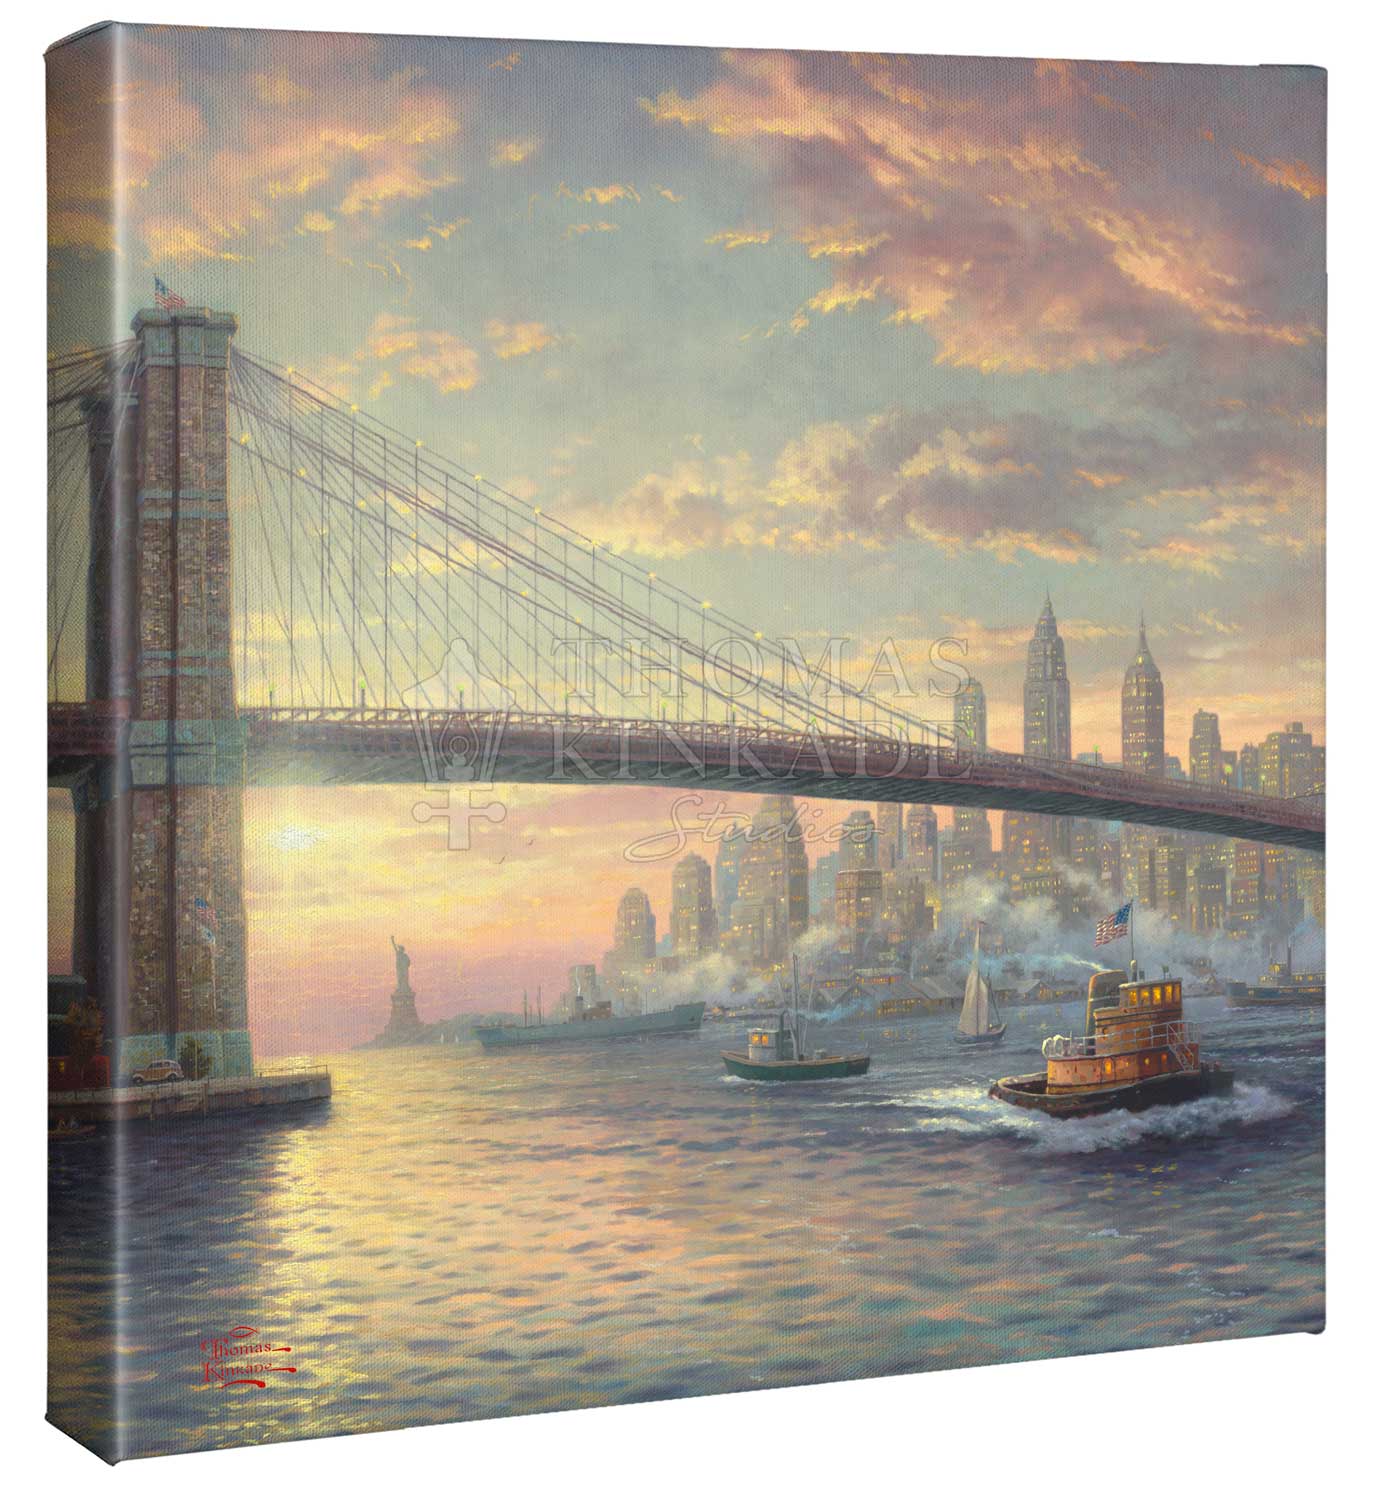 Special Buy One Get One Offer for Mom Promotions - Thomas Kinkade Studios